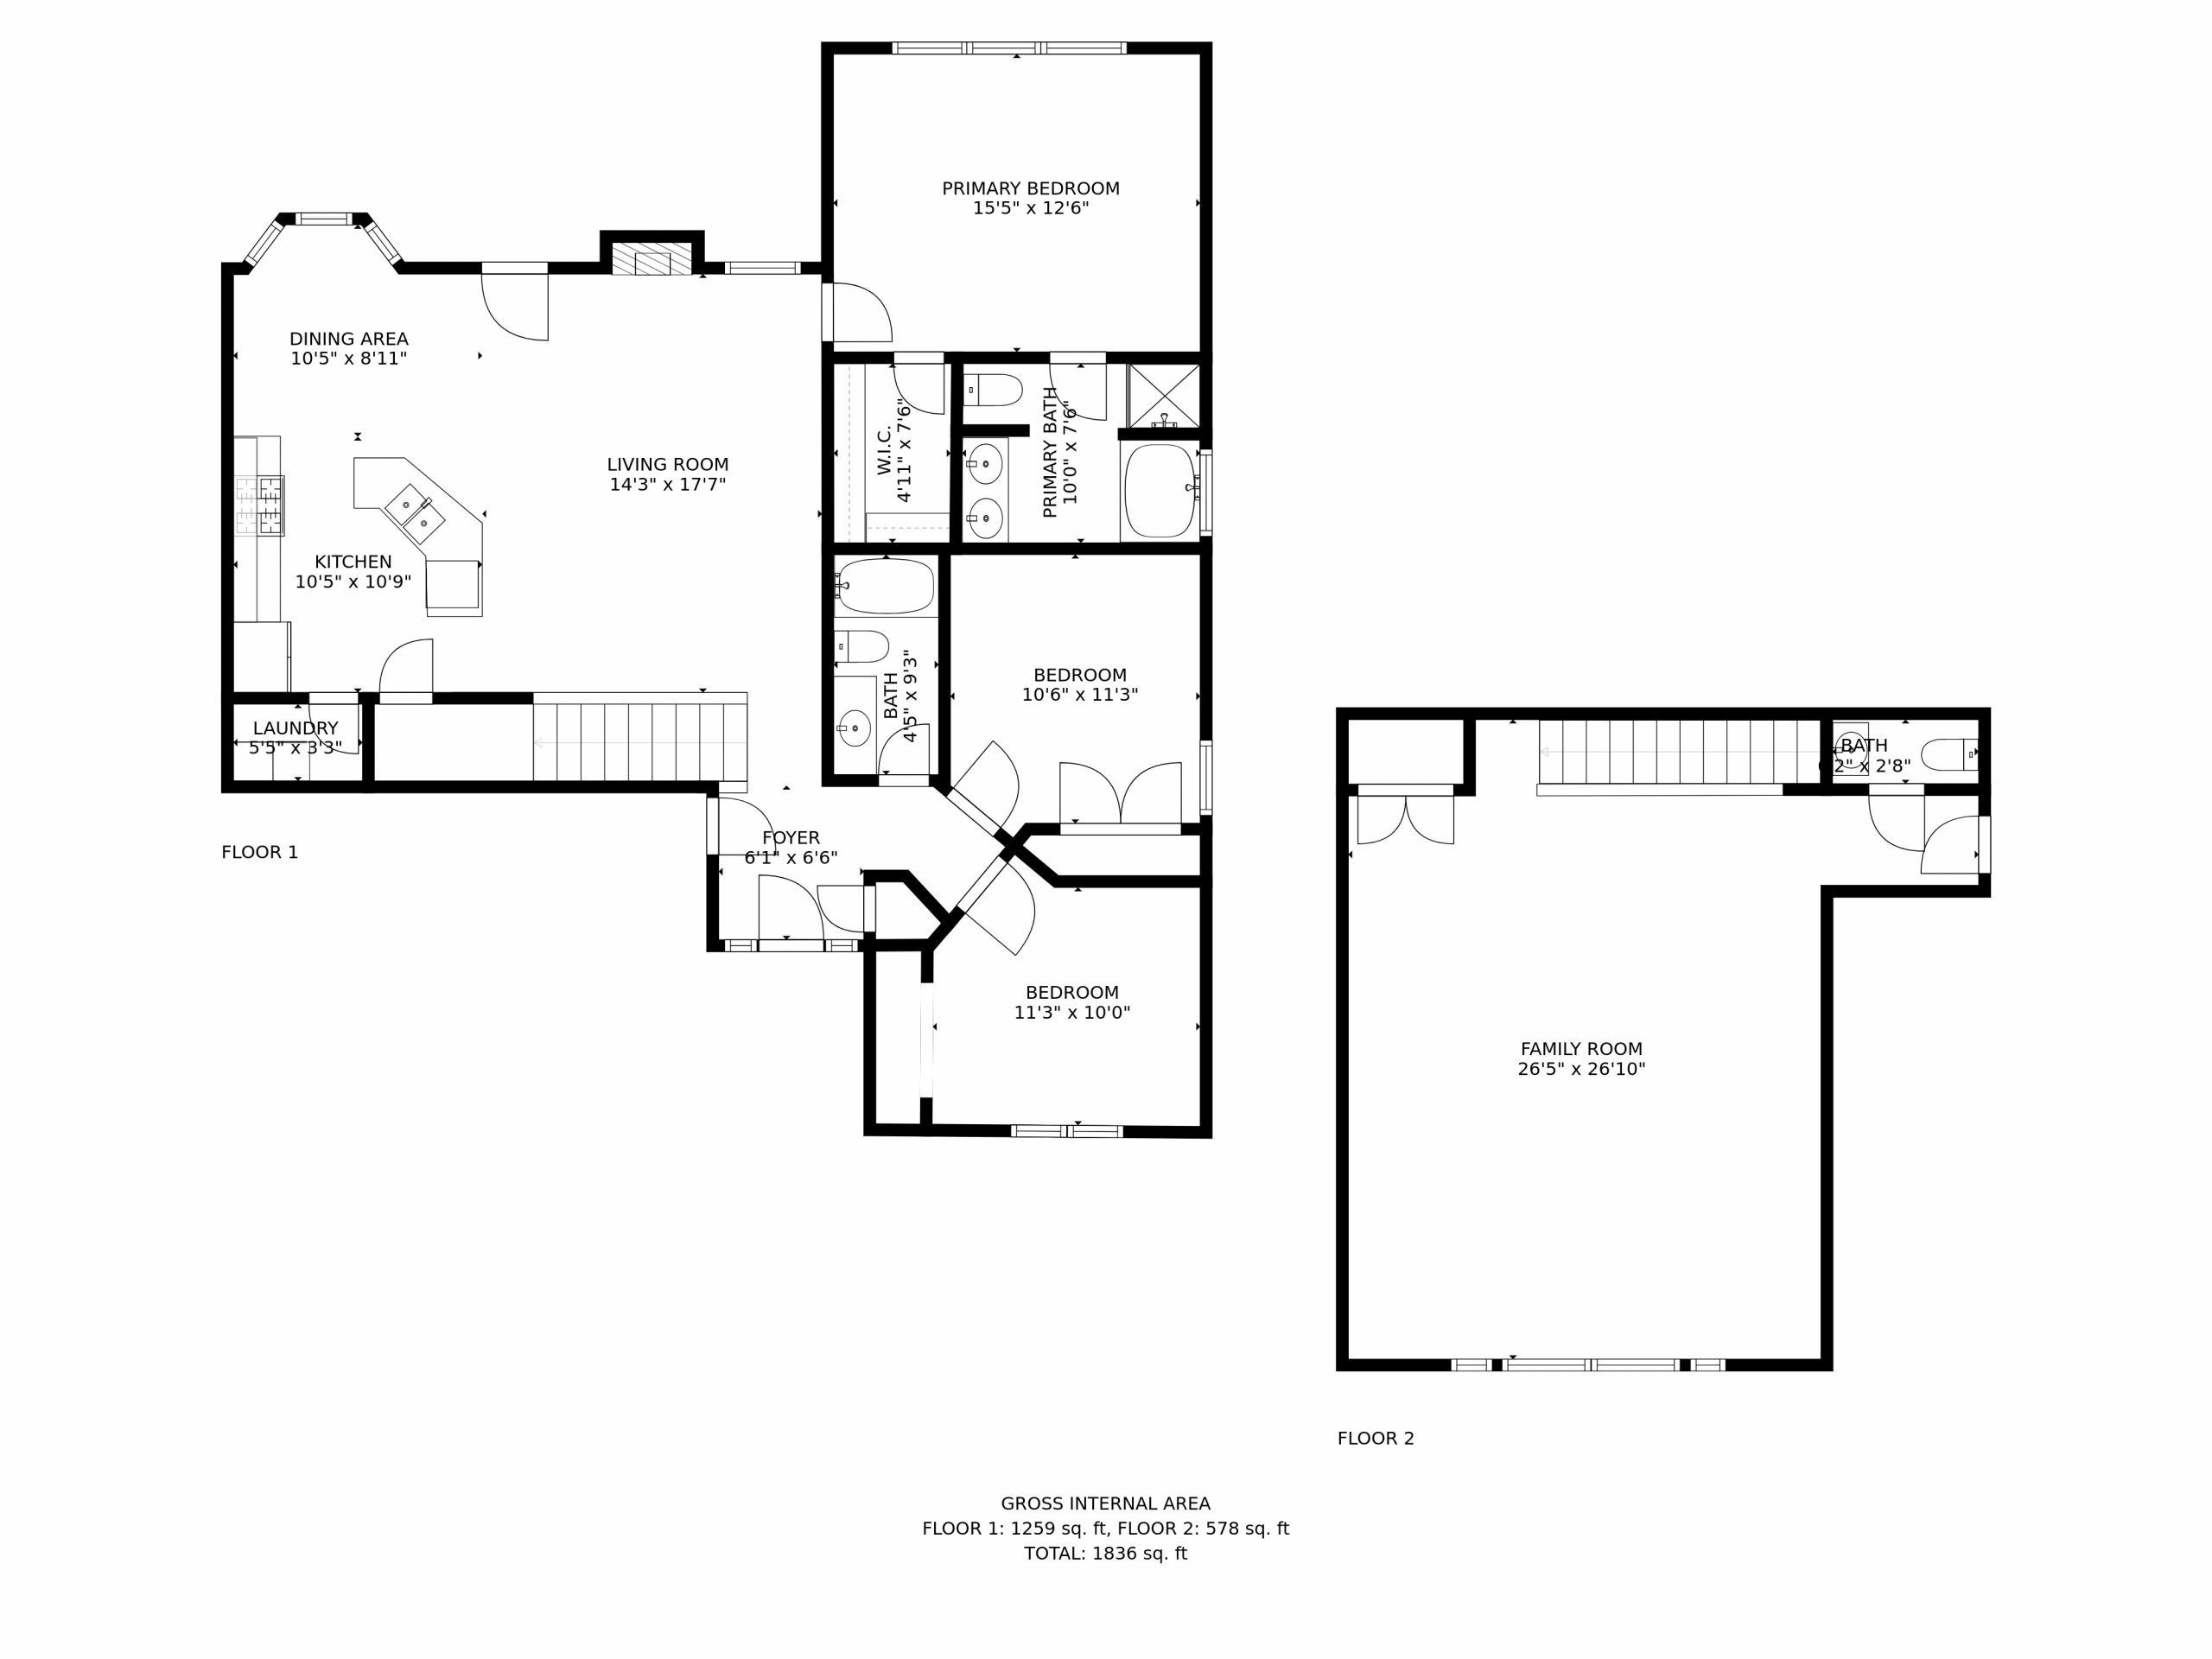 All in one floor plan example image